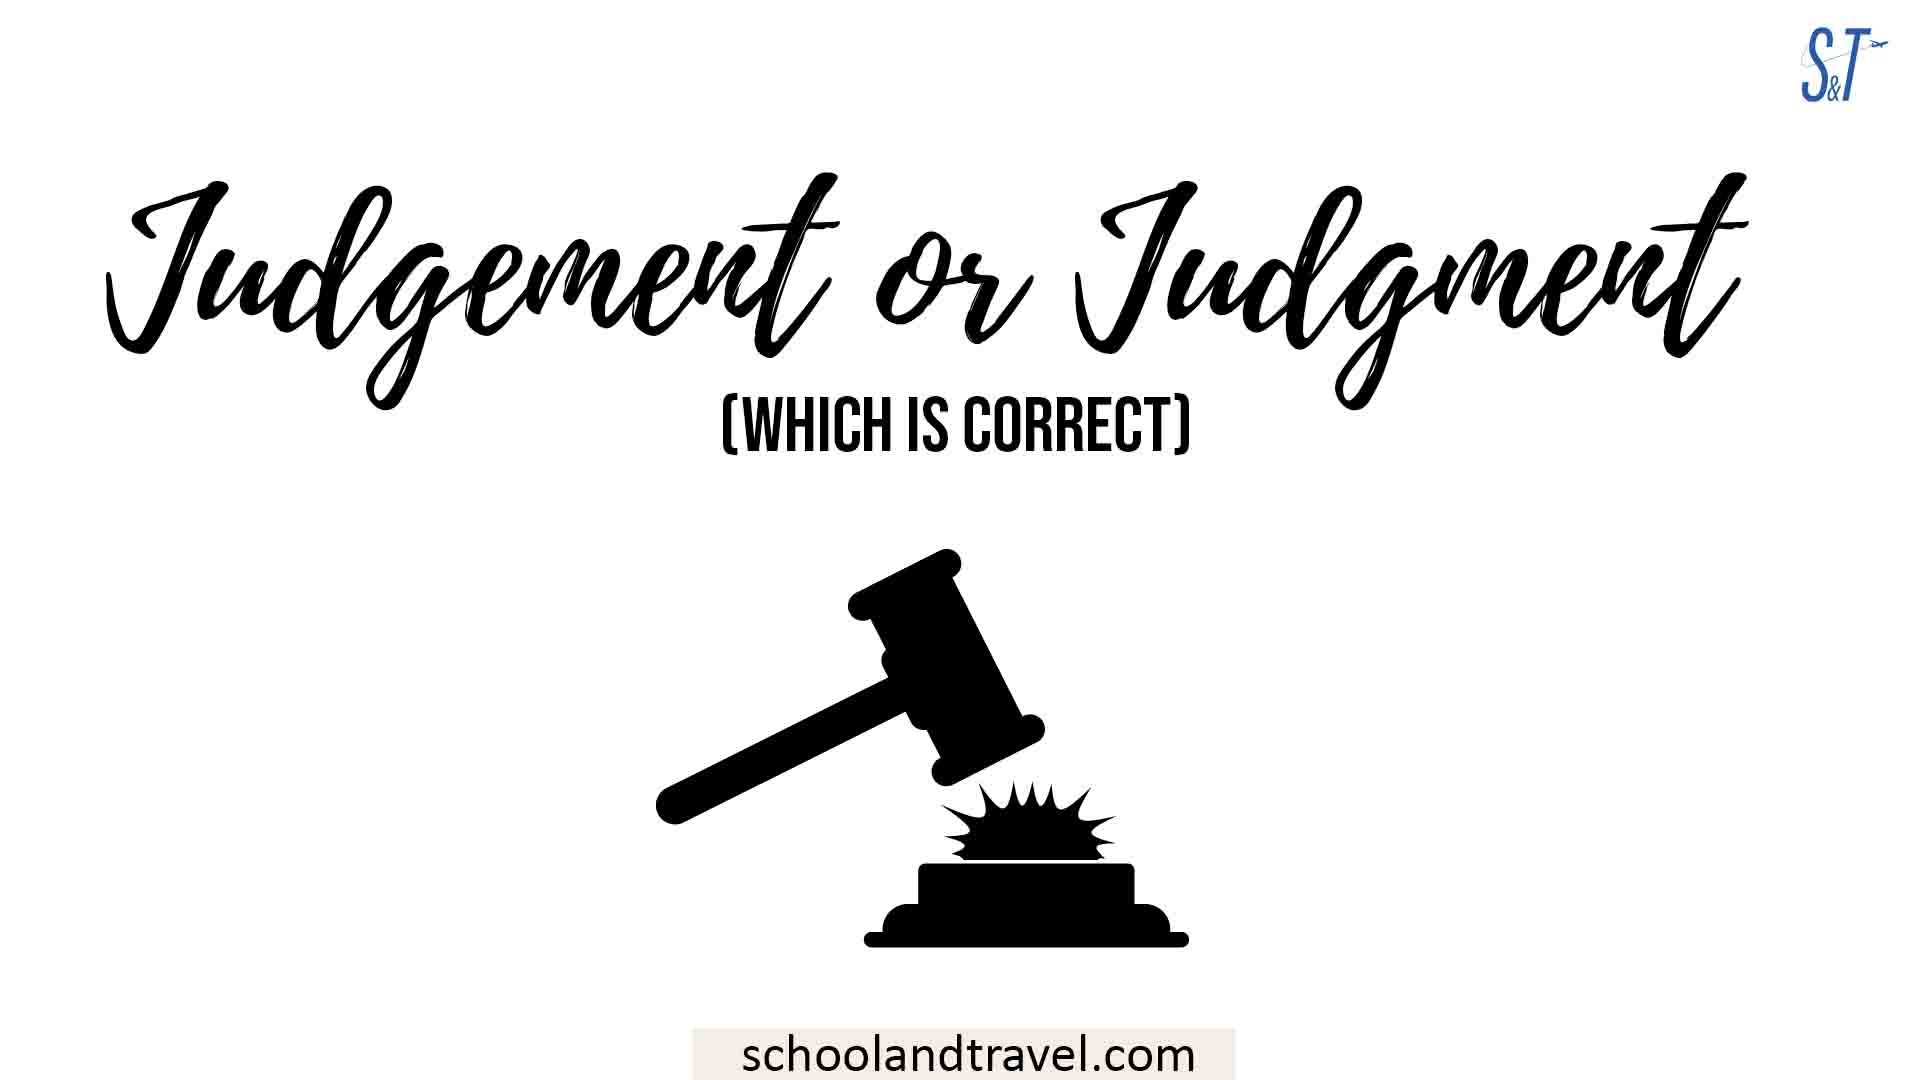 judgement-or-judgment-which-is-correct